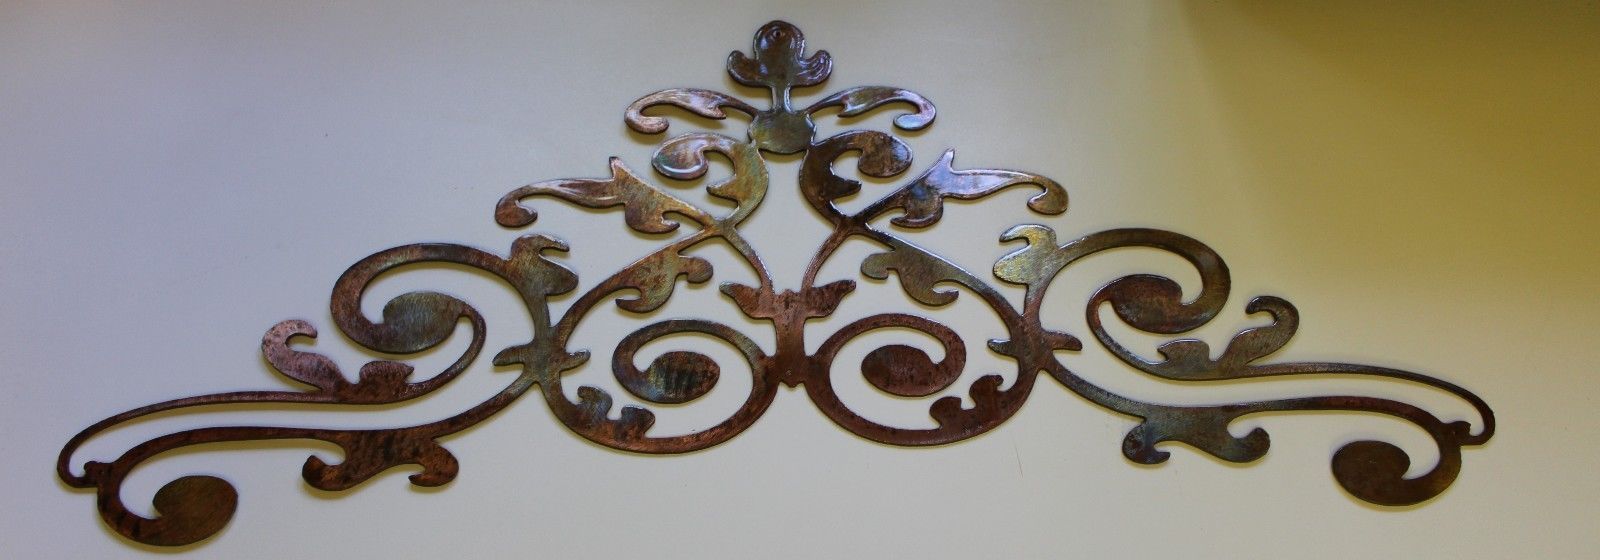 Ornamental Scroll Copper/bronze Plated Metal Wall Decor 24 X 9 3/4 Pertaining To Square Bronze Metal Wall Art (View 9 of 15)